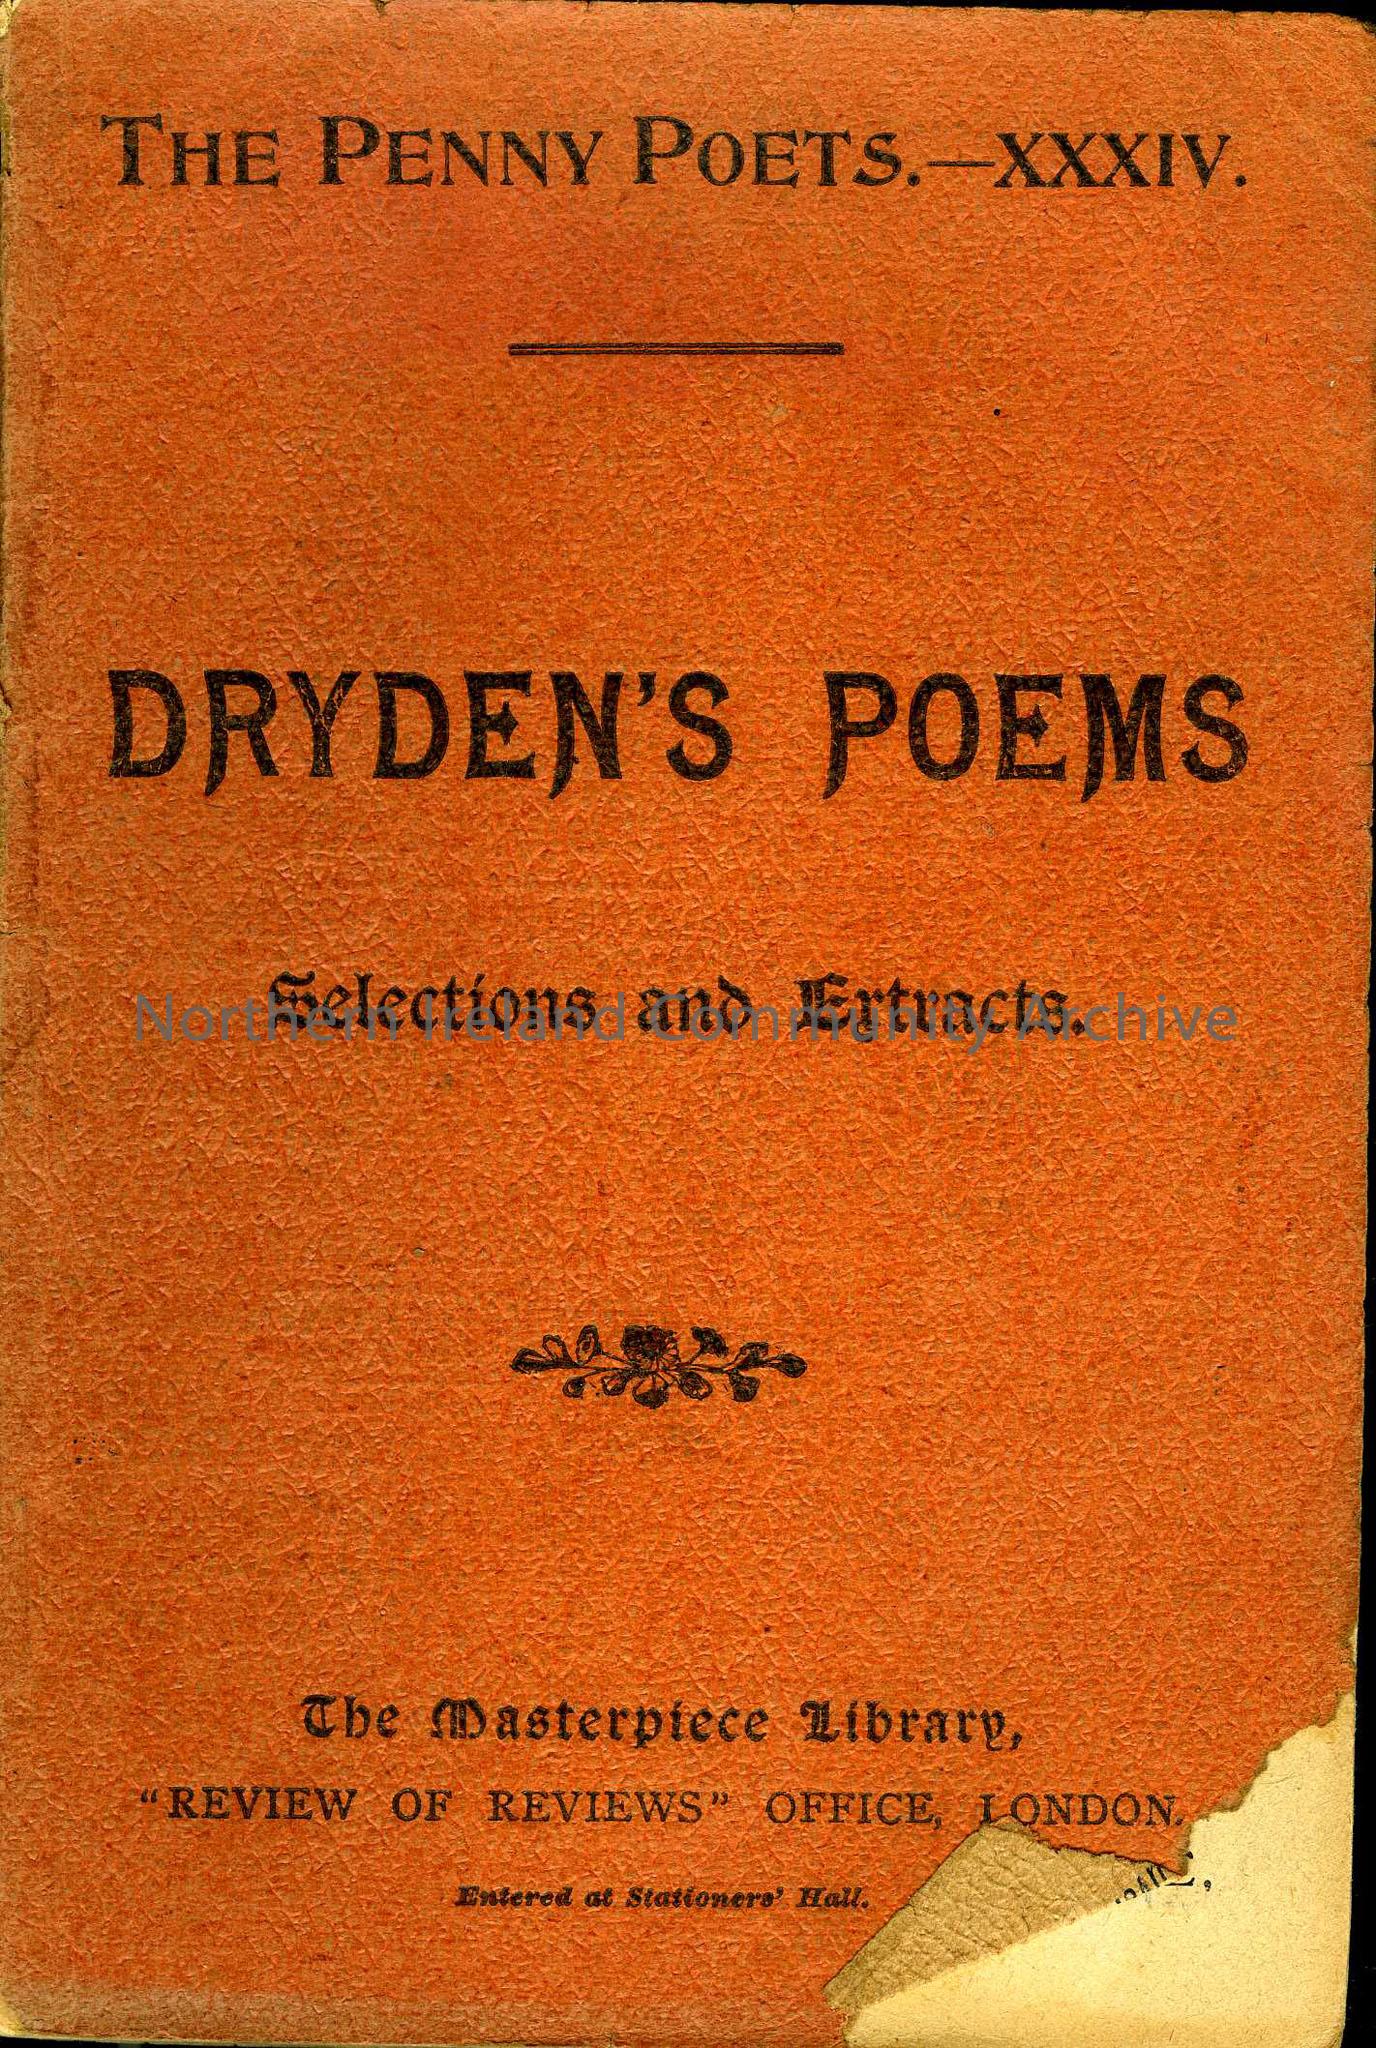 Dryden’s Poems – Selections and Extracts